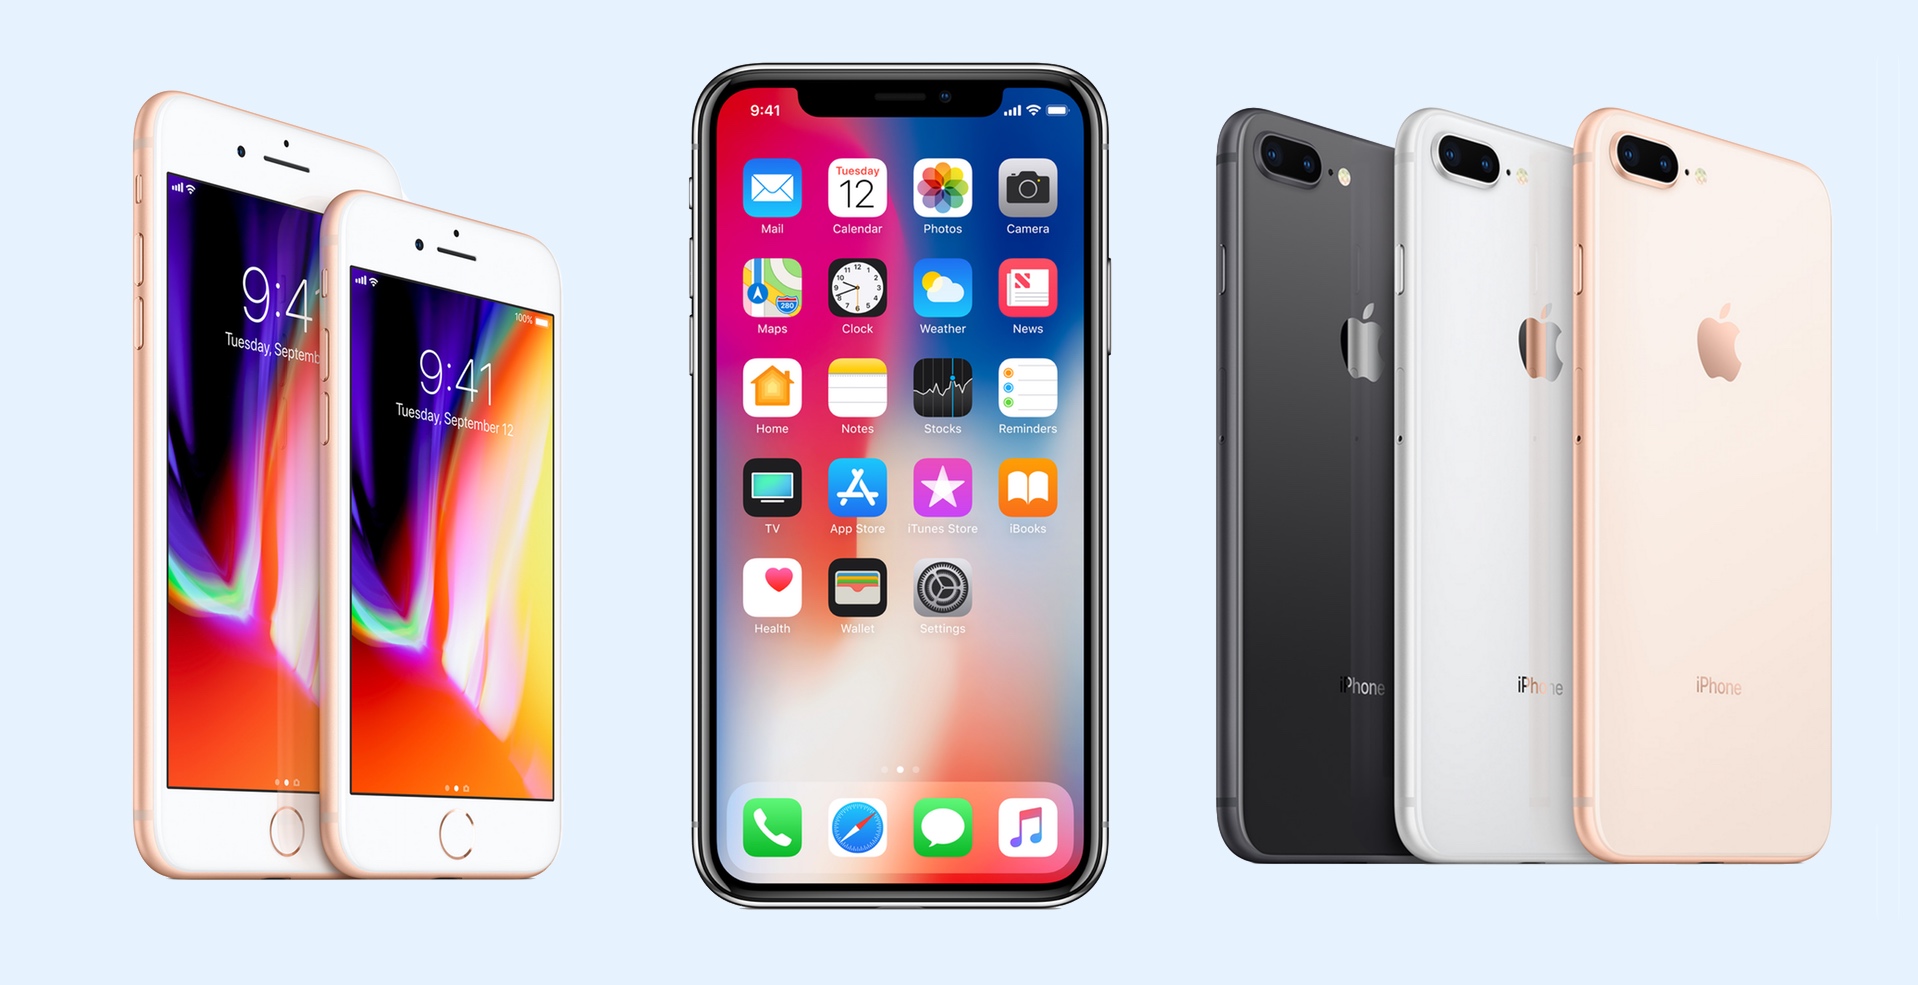 Roundup: iPhone 8, iPhone 8 Plus and iPhone X specs and prices compared